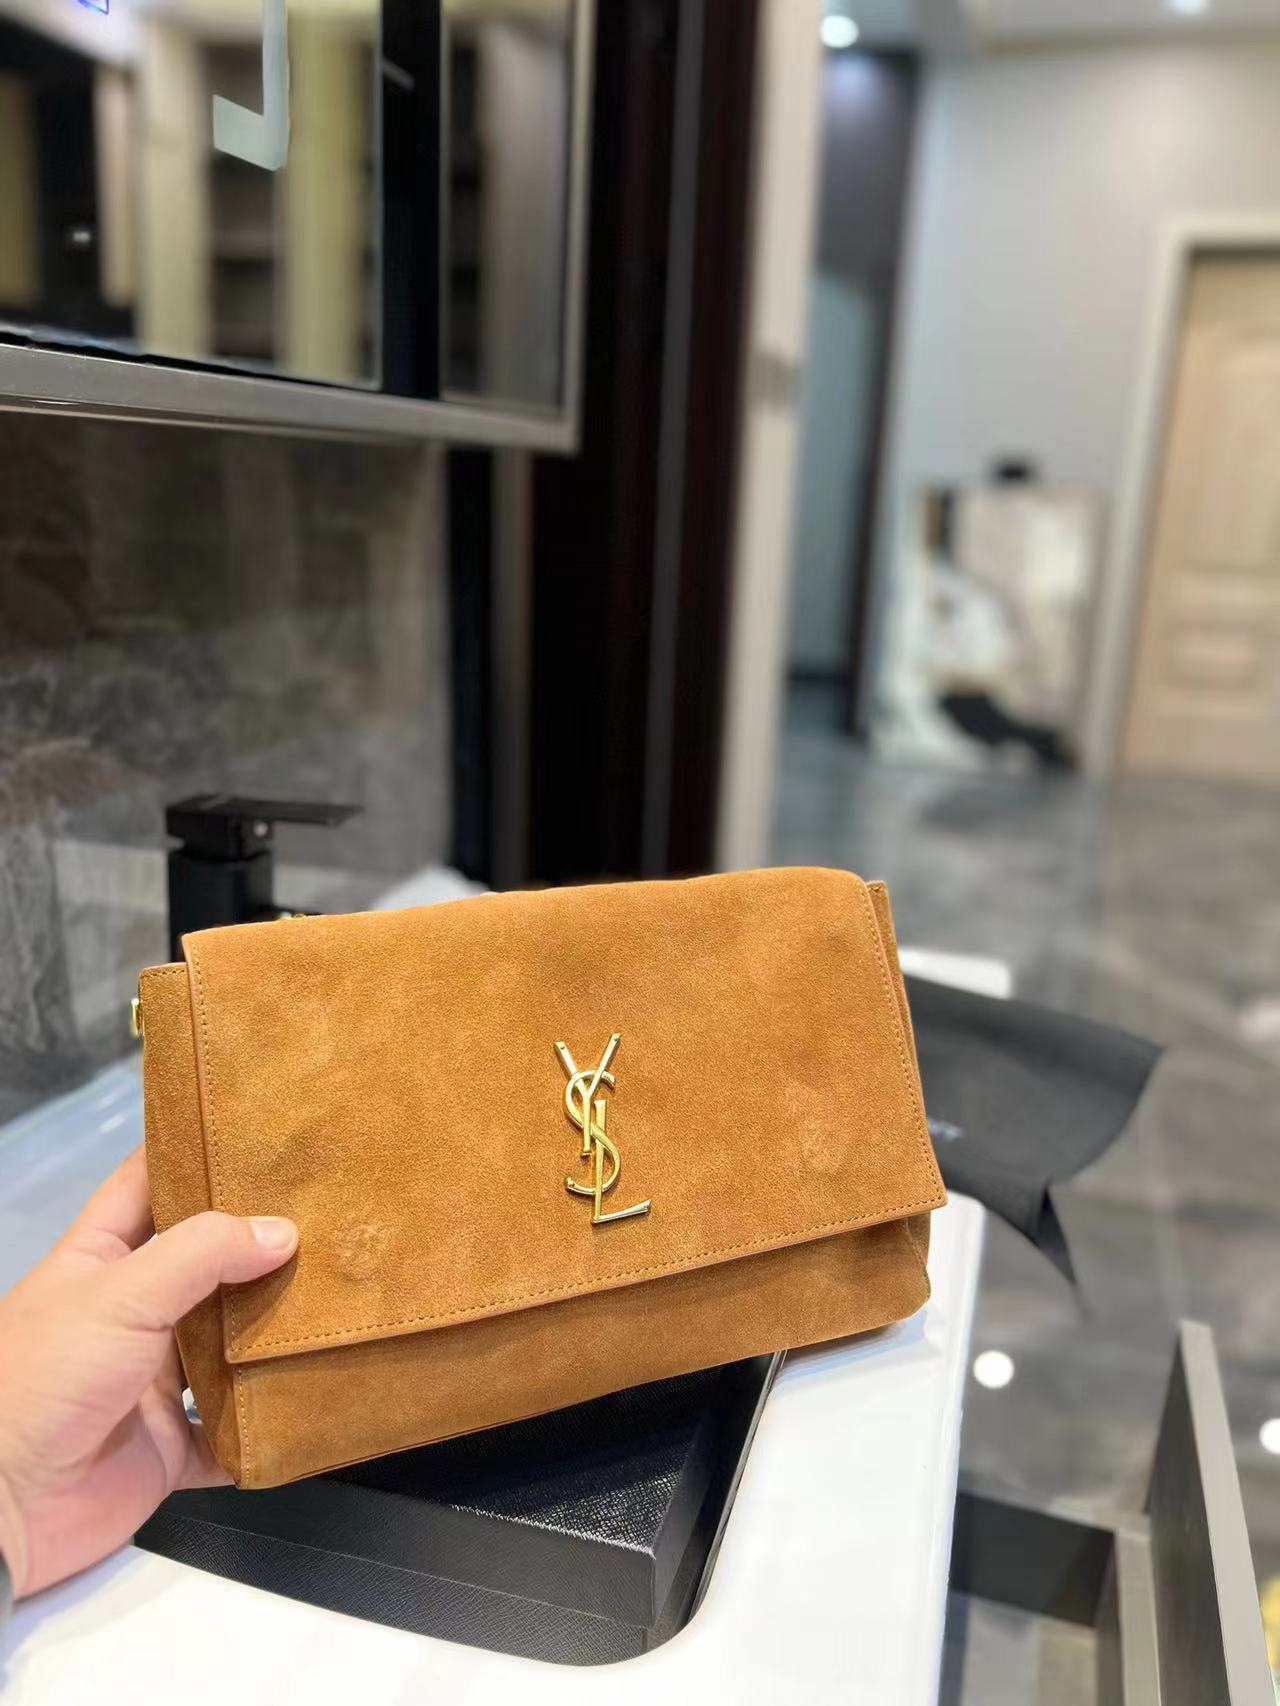 Best Replicas Bags - YSL KATE REVERSE Top Quality Louis Vuitton LV Replica Bags On Sales